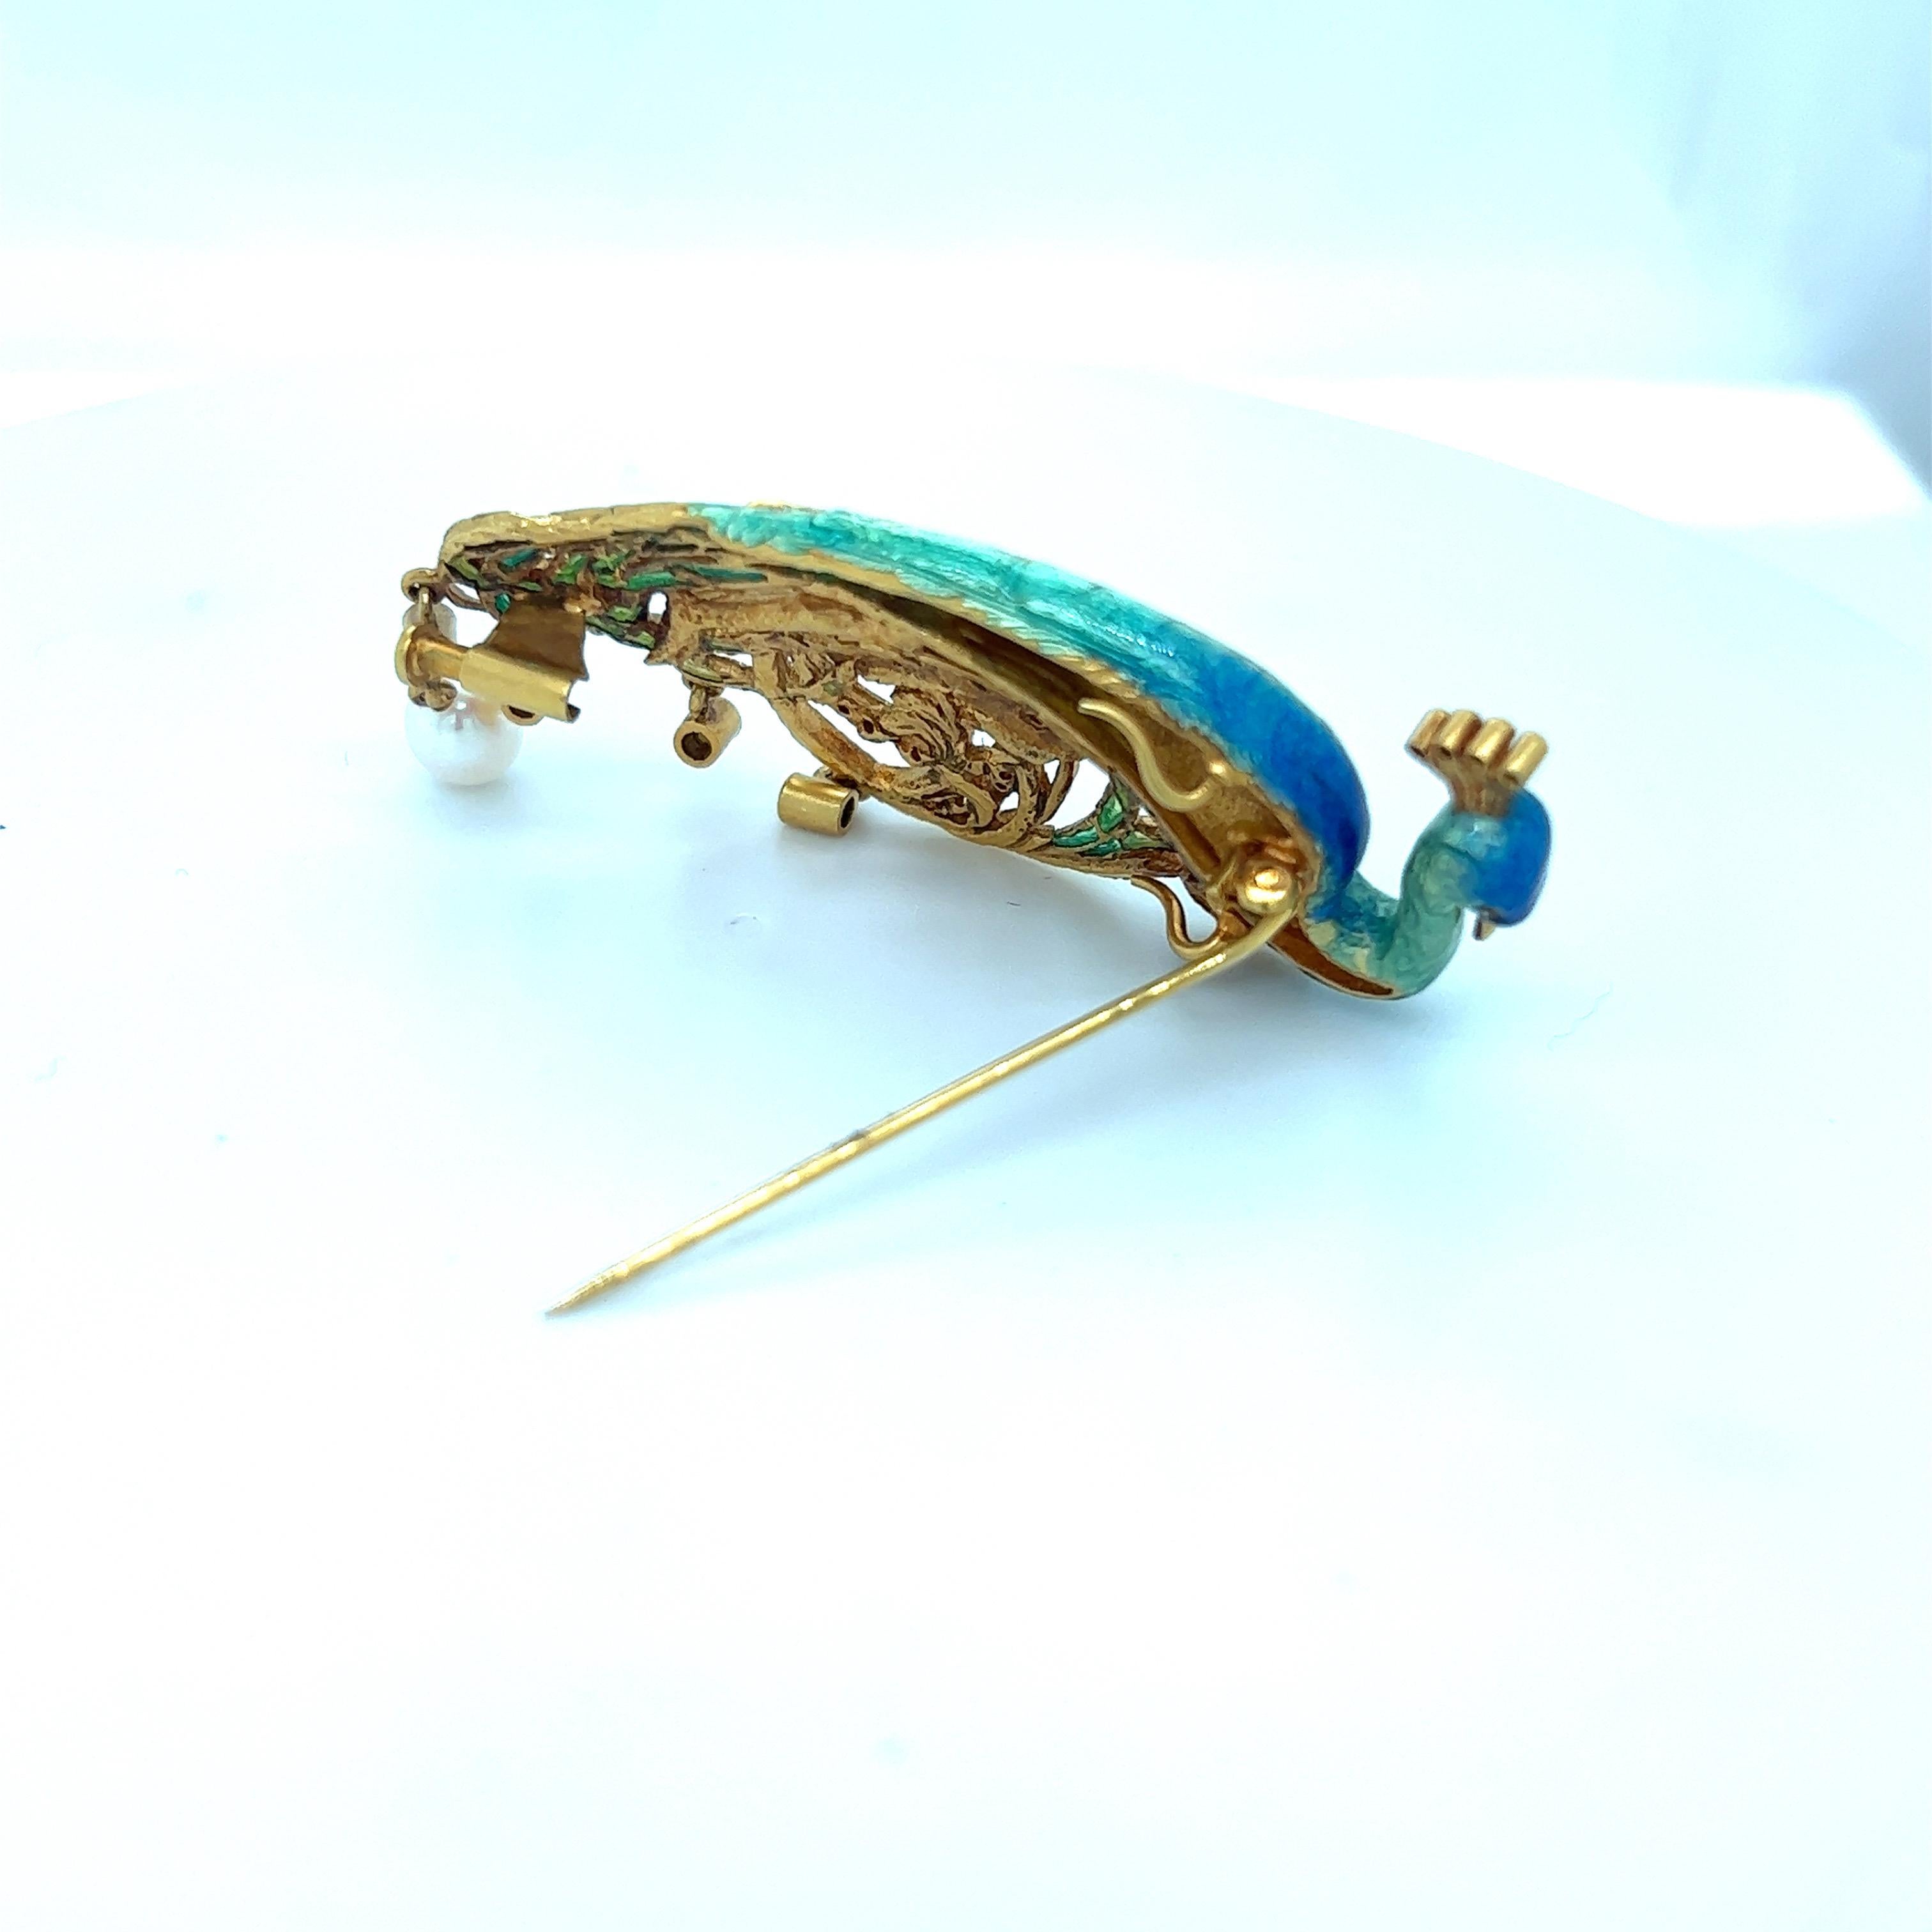 Art Nouveau Masriera 18 KT Yellow Gold Peacock Brooch with Enamel, Dia..41CT and Pearl For Sale